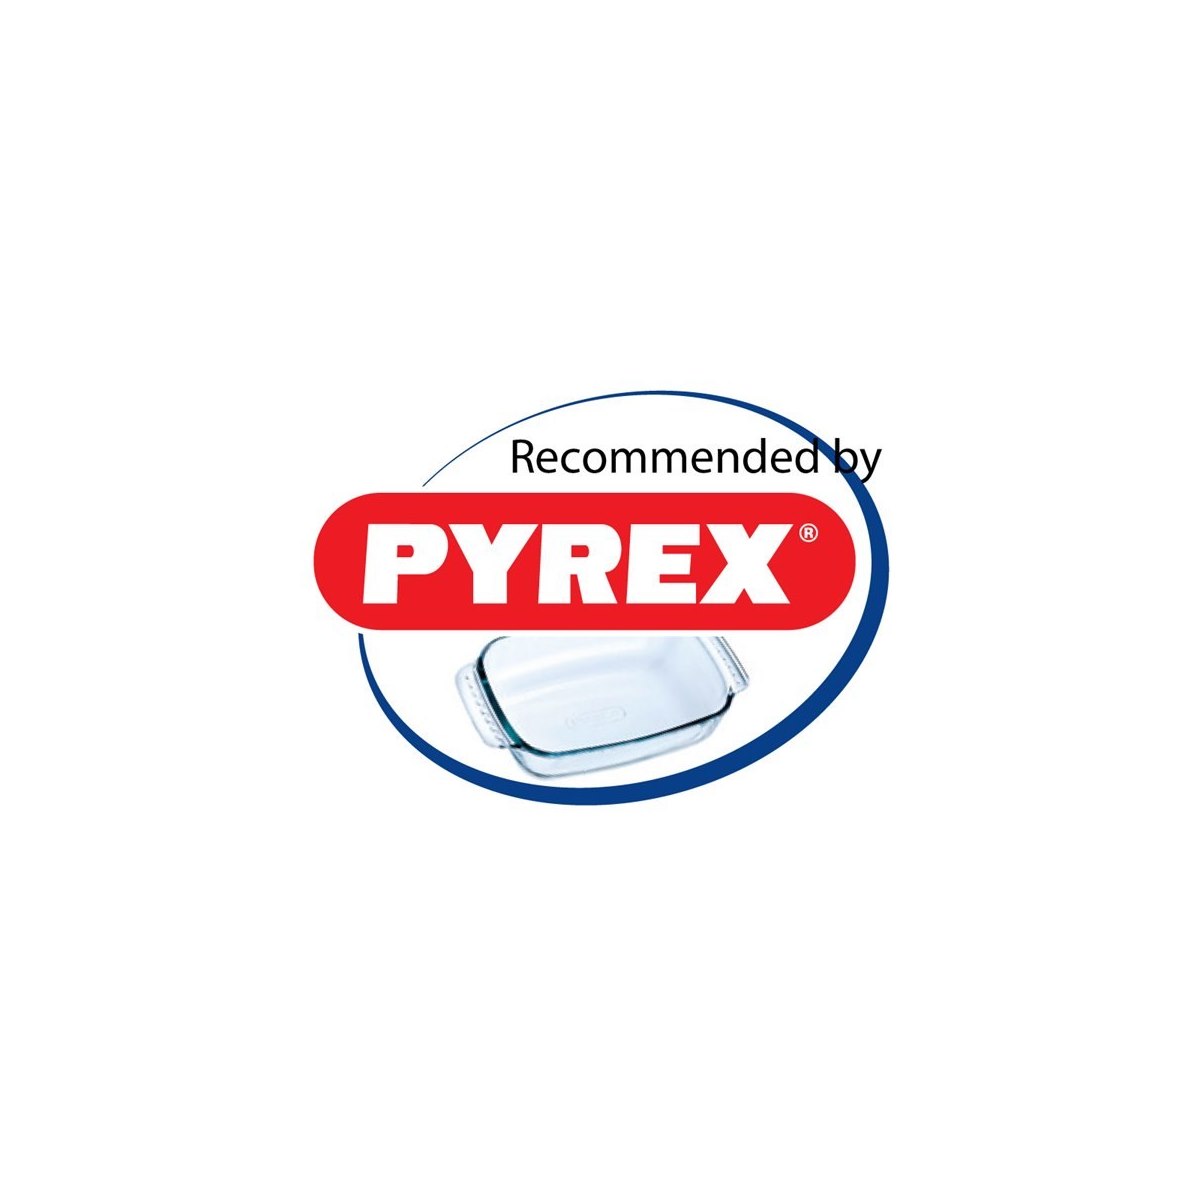 Scourer Recommended for Pyrex